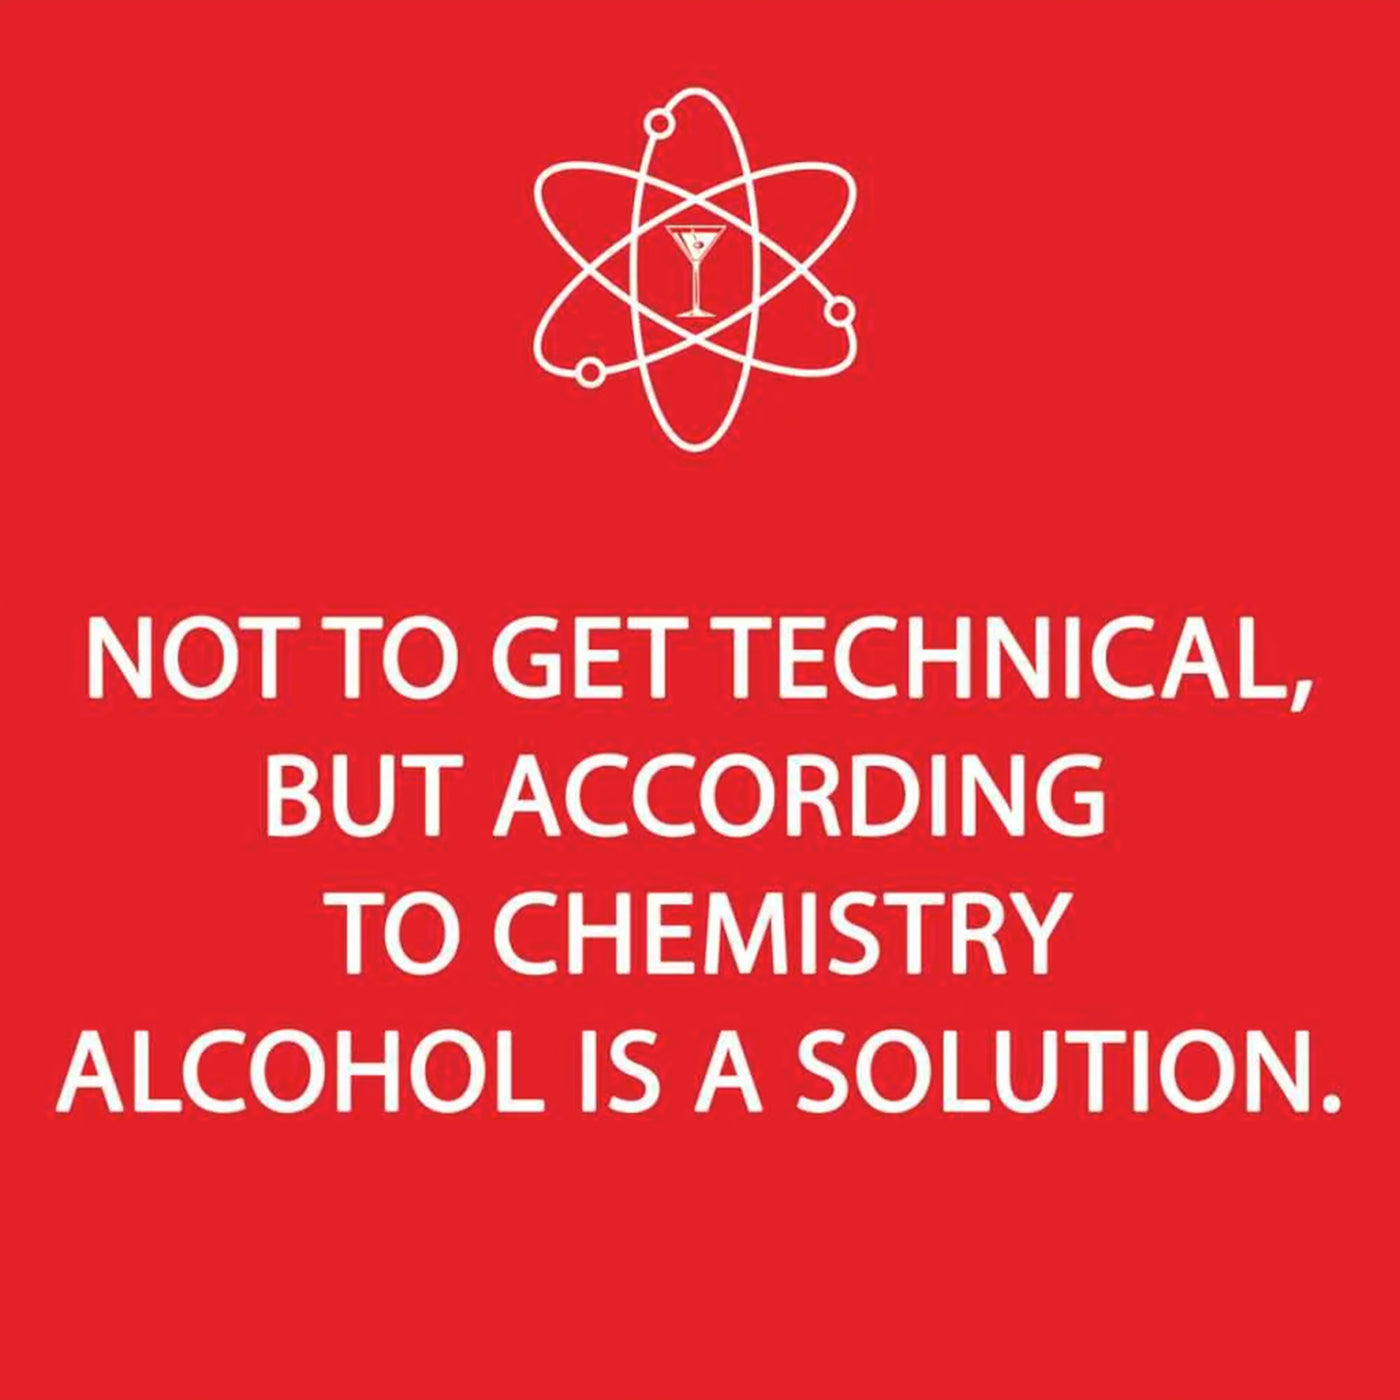 Technically Alcohol is a Solution